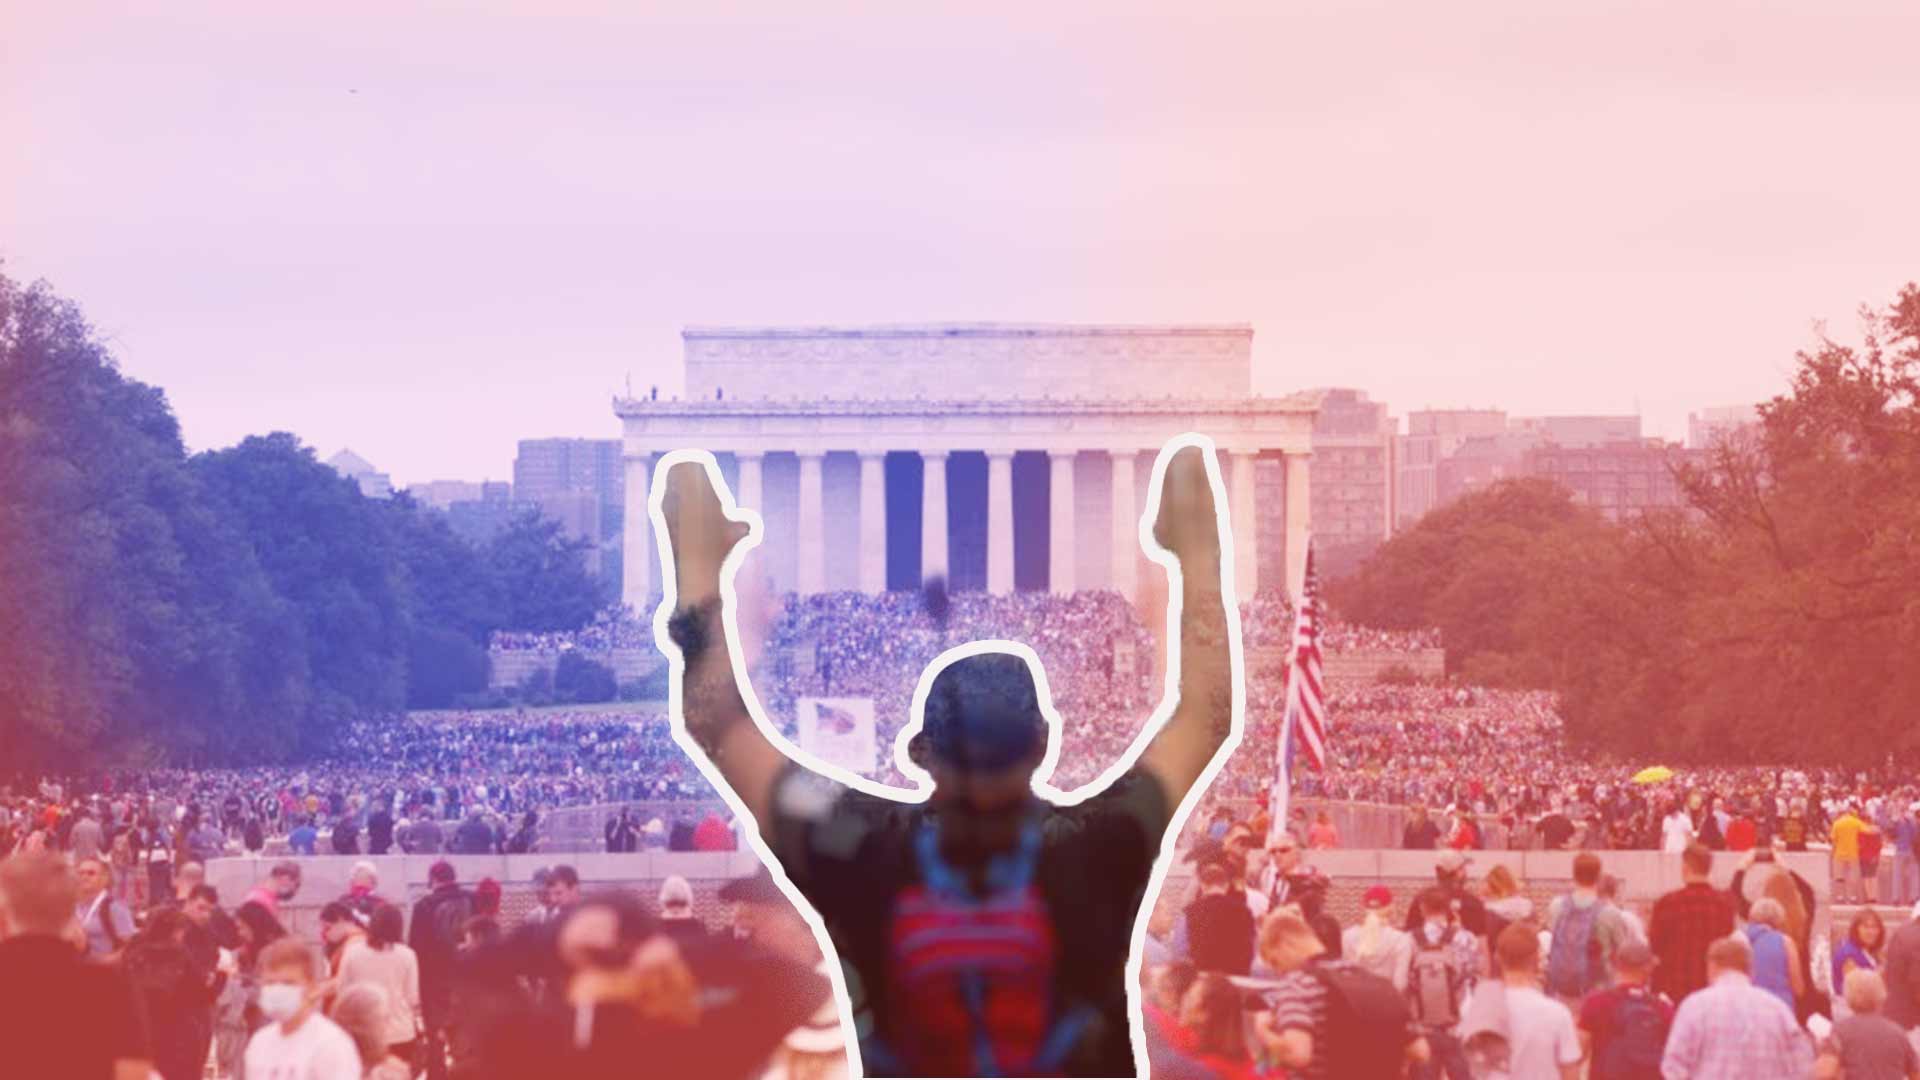 Man Worships in a crowd at the Lincoln Memorial in Washington D.C.